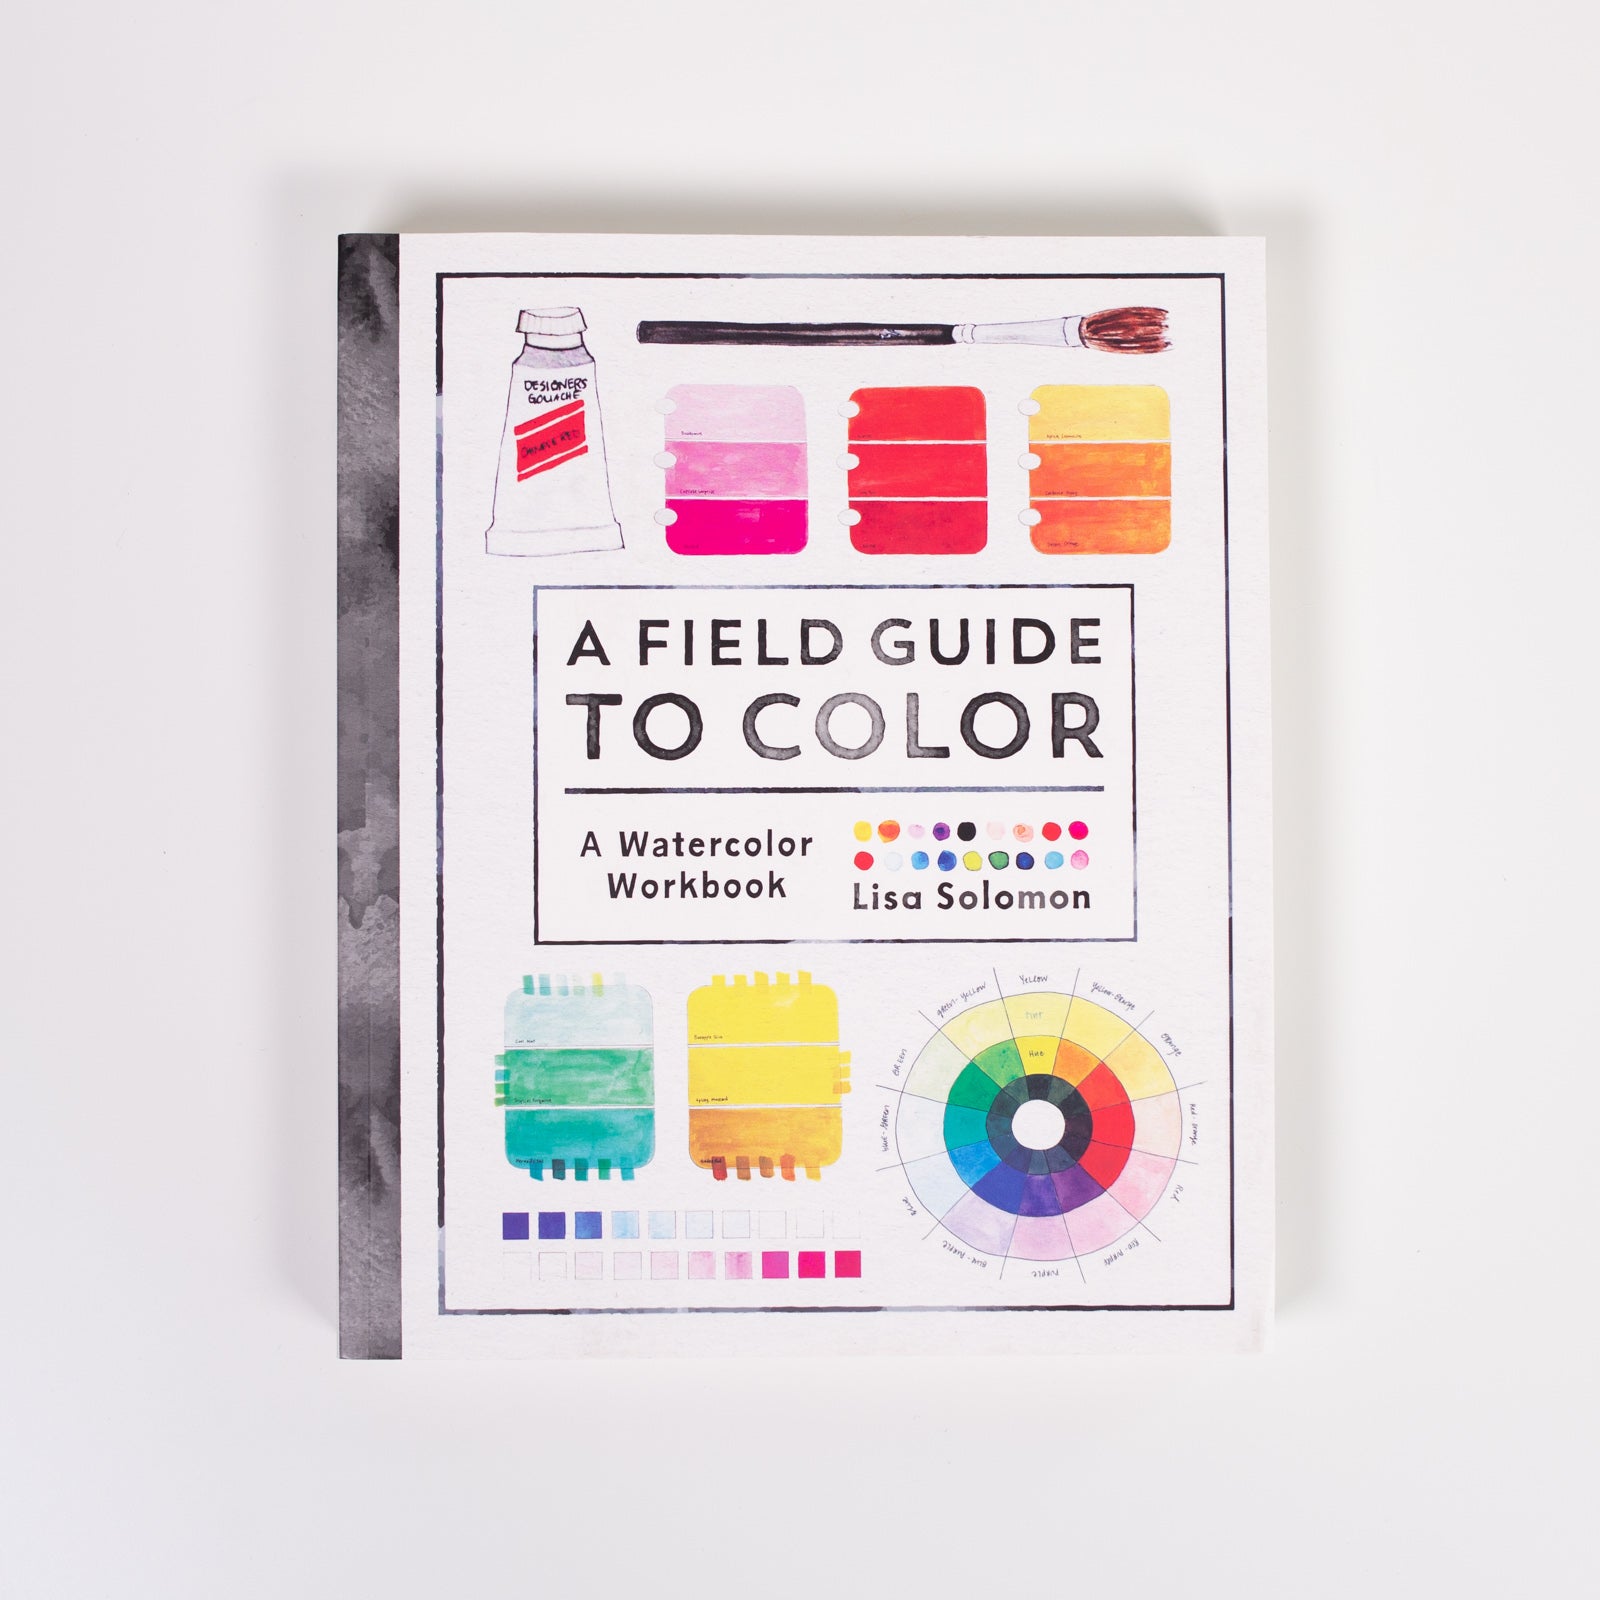 A Field Guide to Color' by Lisa Solomon